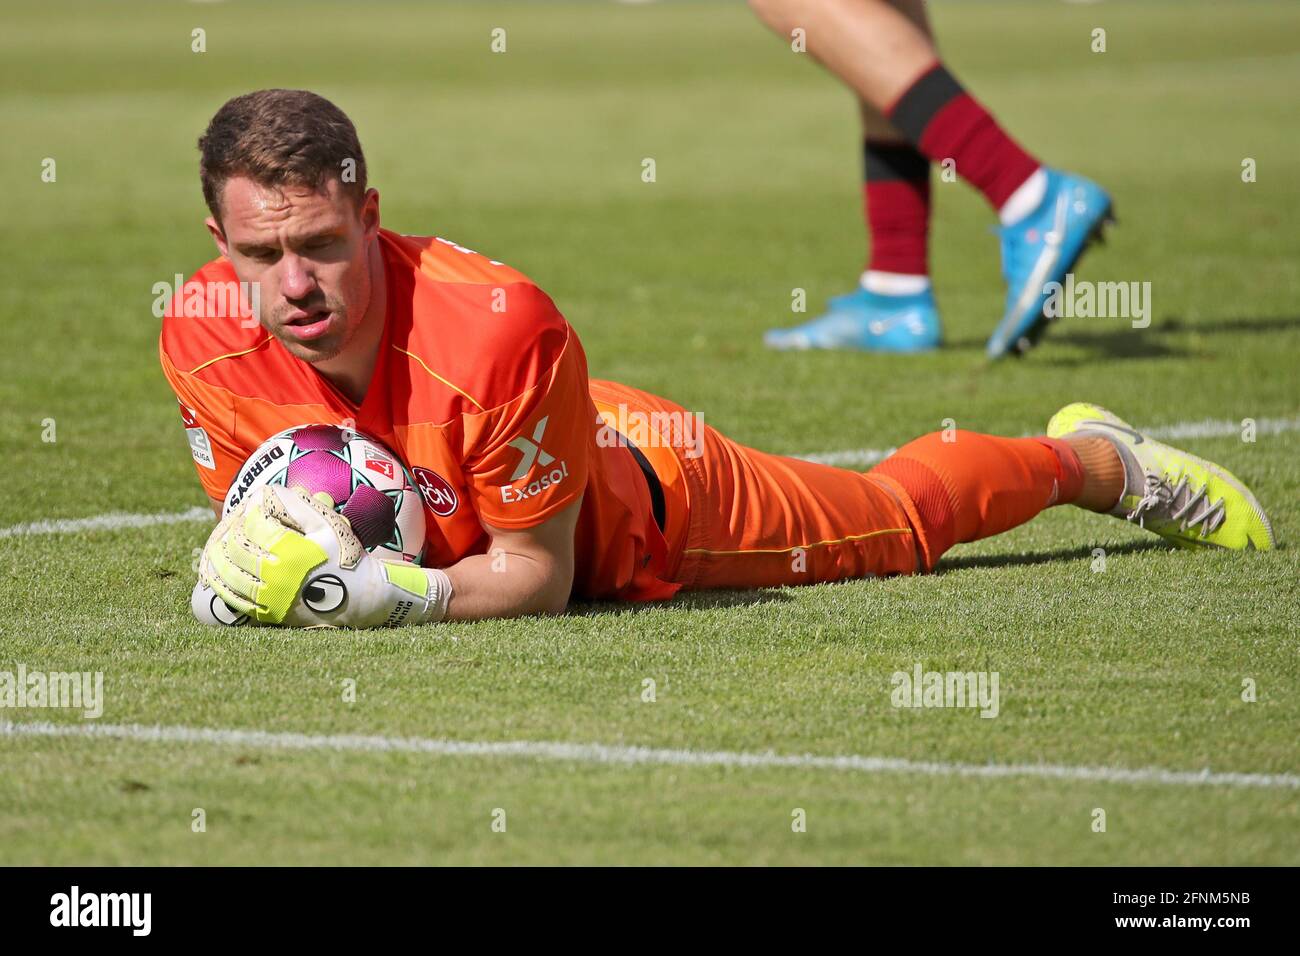 Nuremberg, Germany. 16th May, 2021. Football: 2. Bundesliga, 1. FC Nürnberg - VfL Bochum, 33. matchday at Max-Morlock-Stadion. Nuremberg goalkeeper Christian Mathenia lies on the pitch with the ball. Credit: Daniel Karmann/dpa - IMPORTANT NOTE: In accordance with the regulations of the DFL Deutsche Fußball Liga and/or the DFB Deutscher Fußball-Bund, it is prohibited to use or have used photographs taken in the stadium and/or of the match in the form of sequence pictures and/or video-like photo series./dpa/Alamy Live News Stock Photo